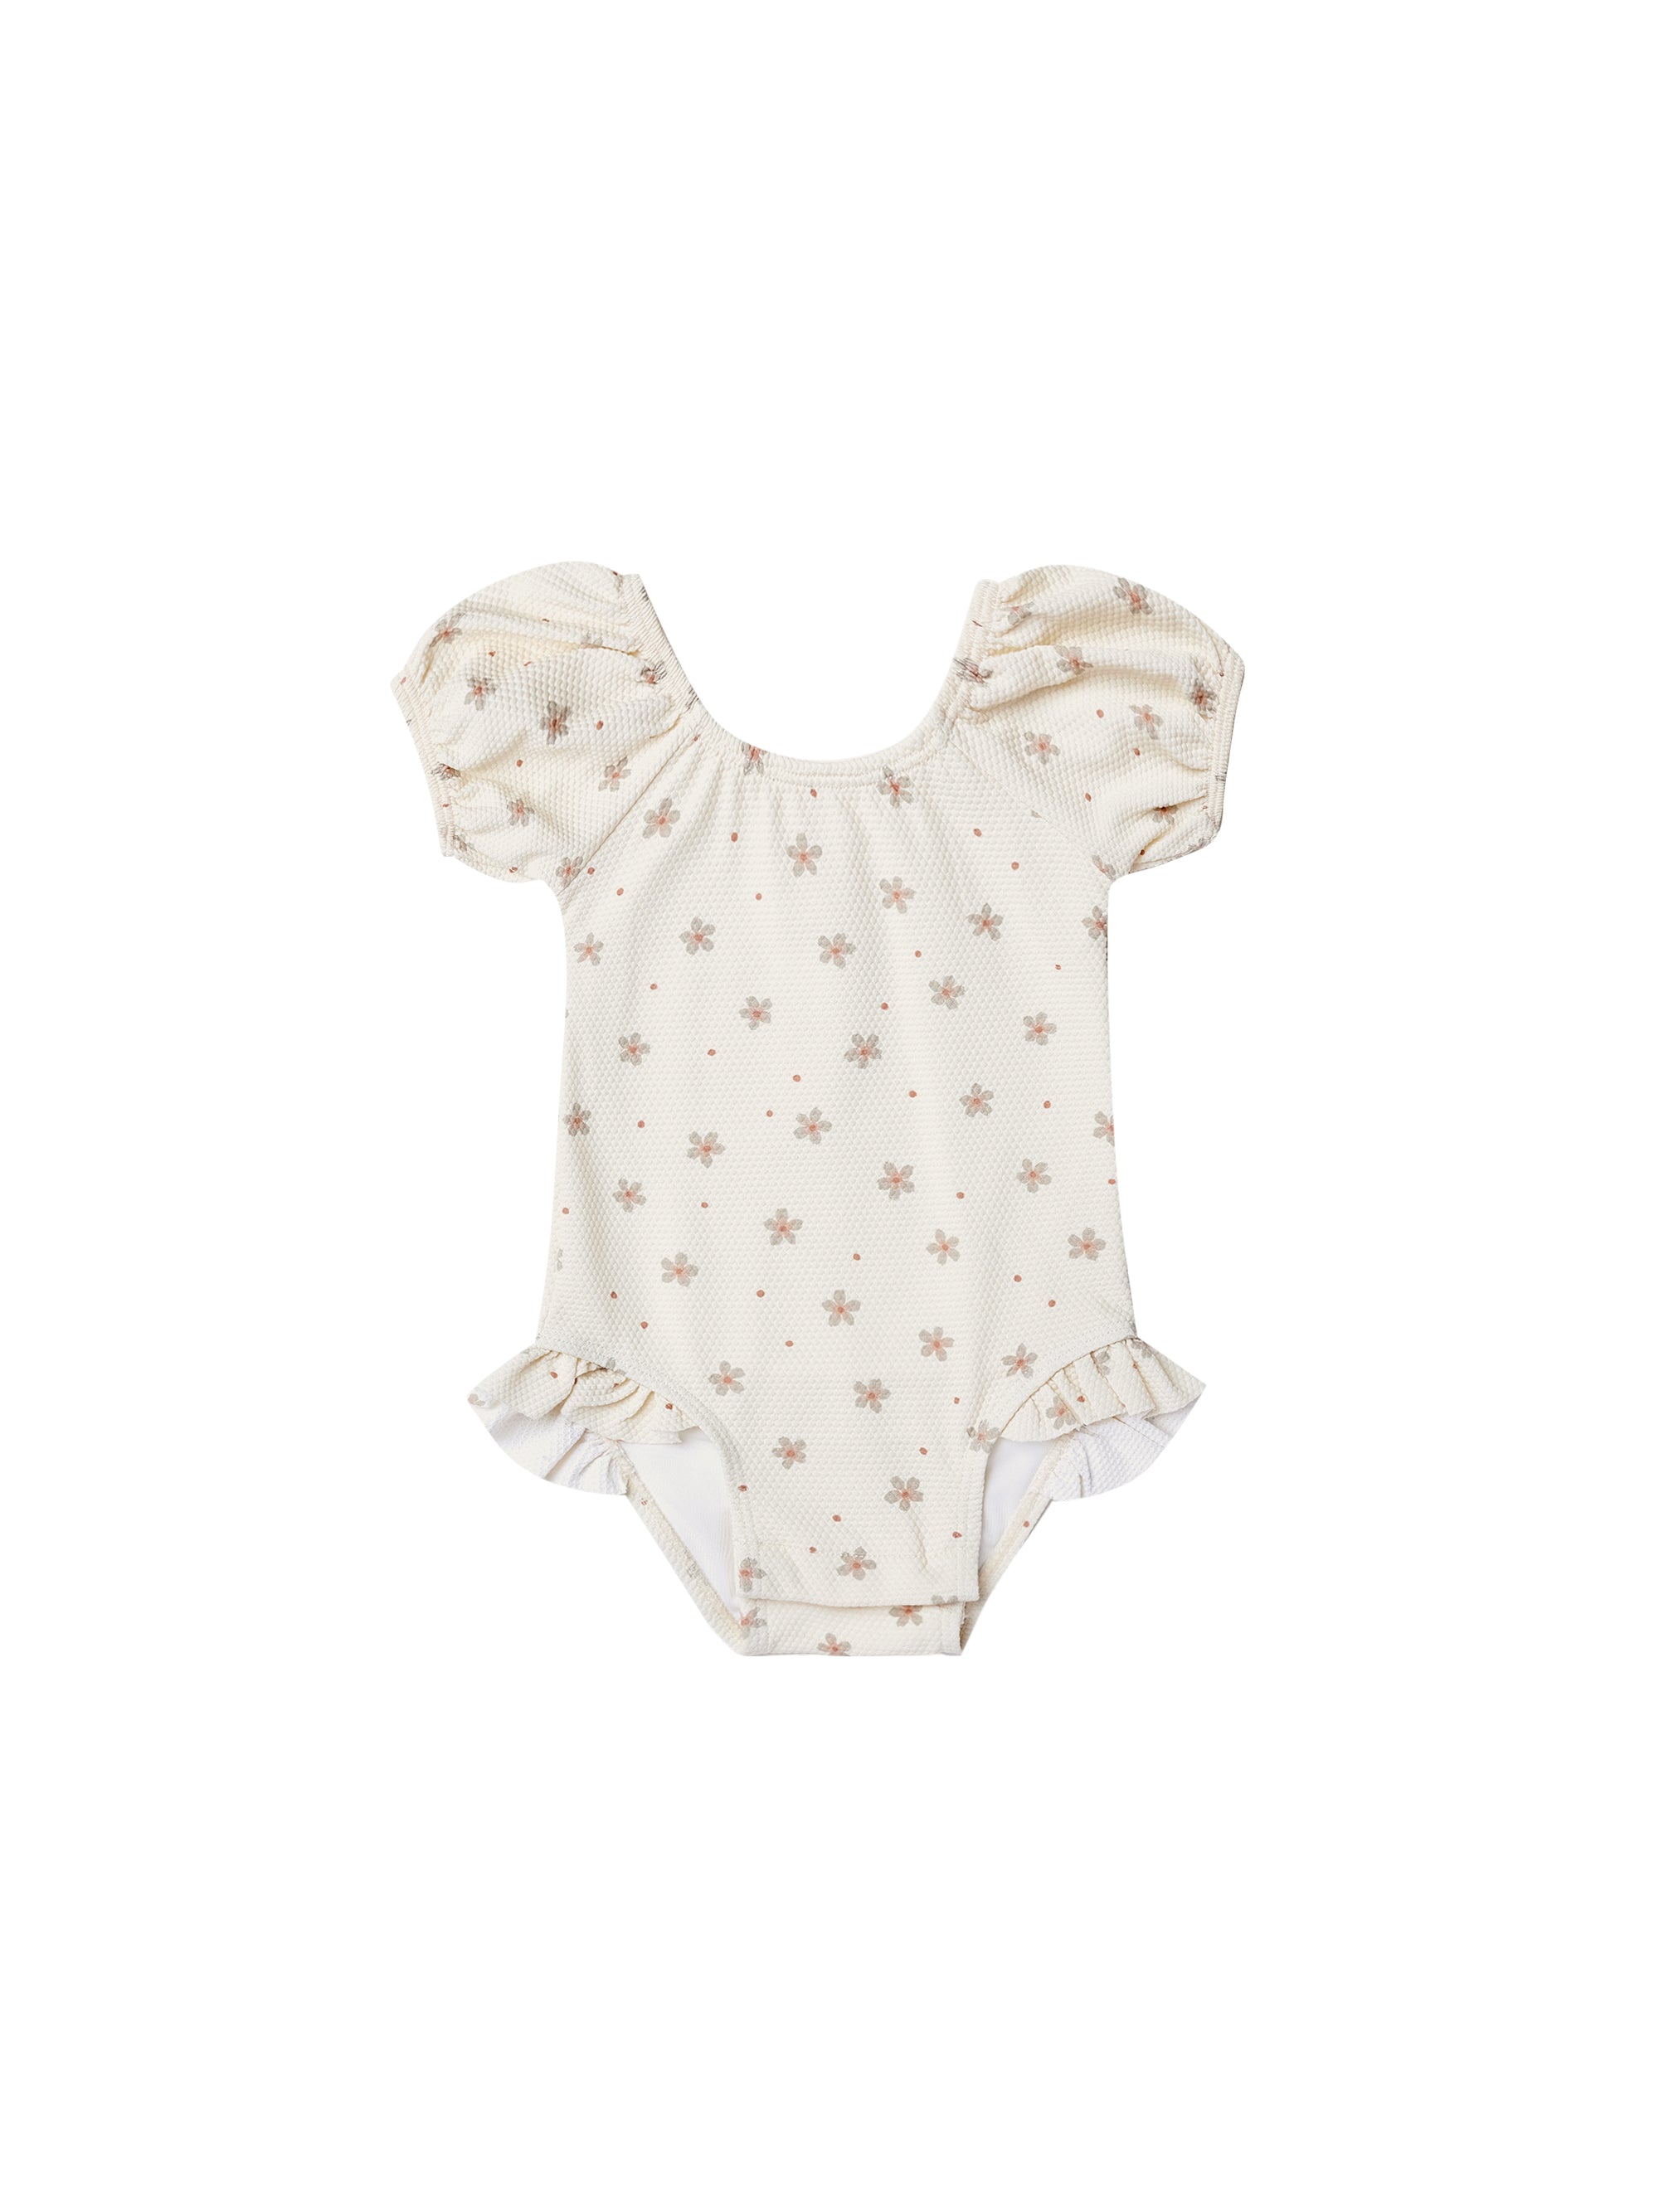 Quincy Mae | Catalina One-Piece Swimsuit | Dotty Floral